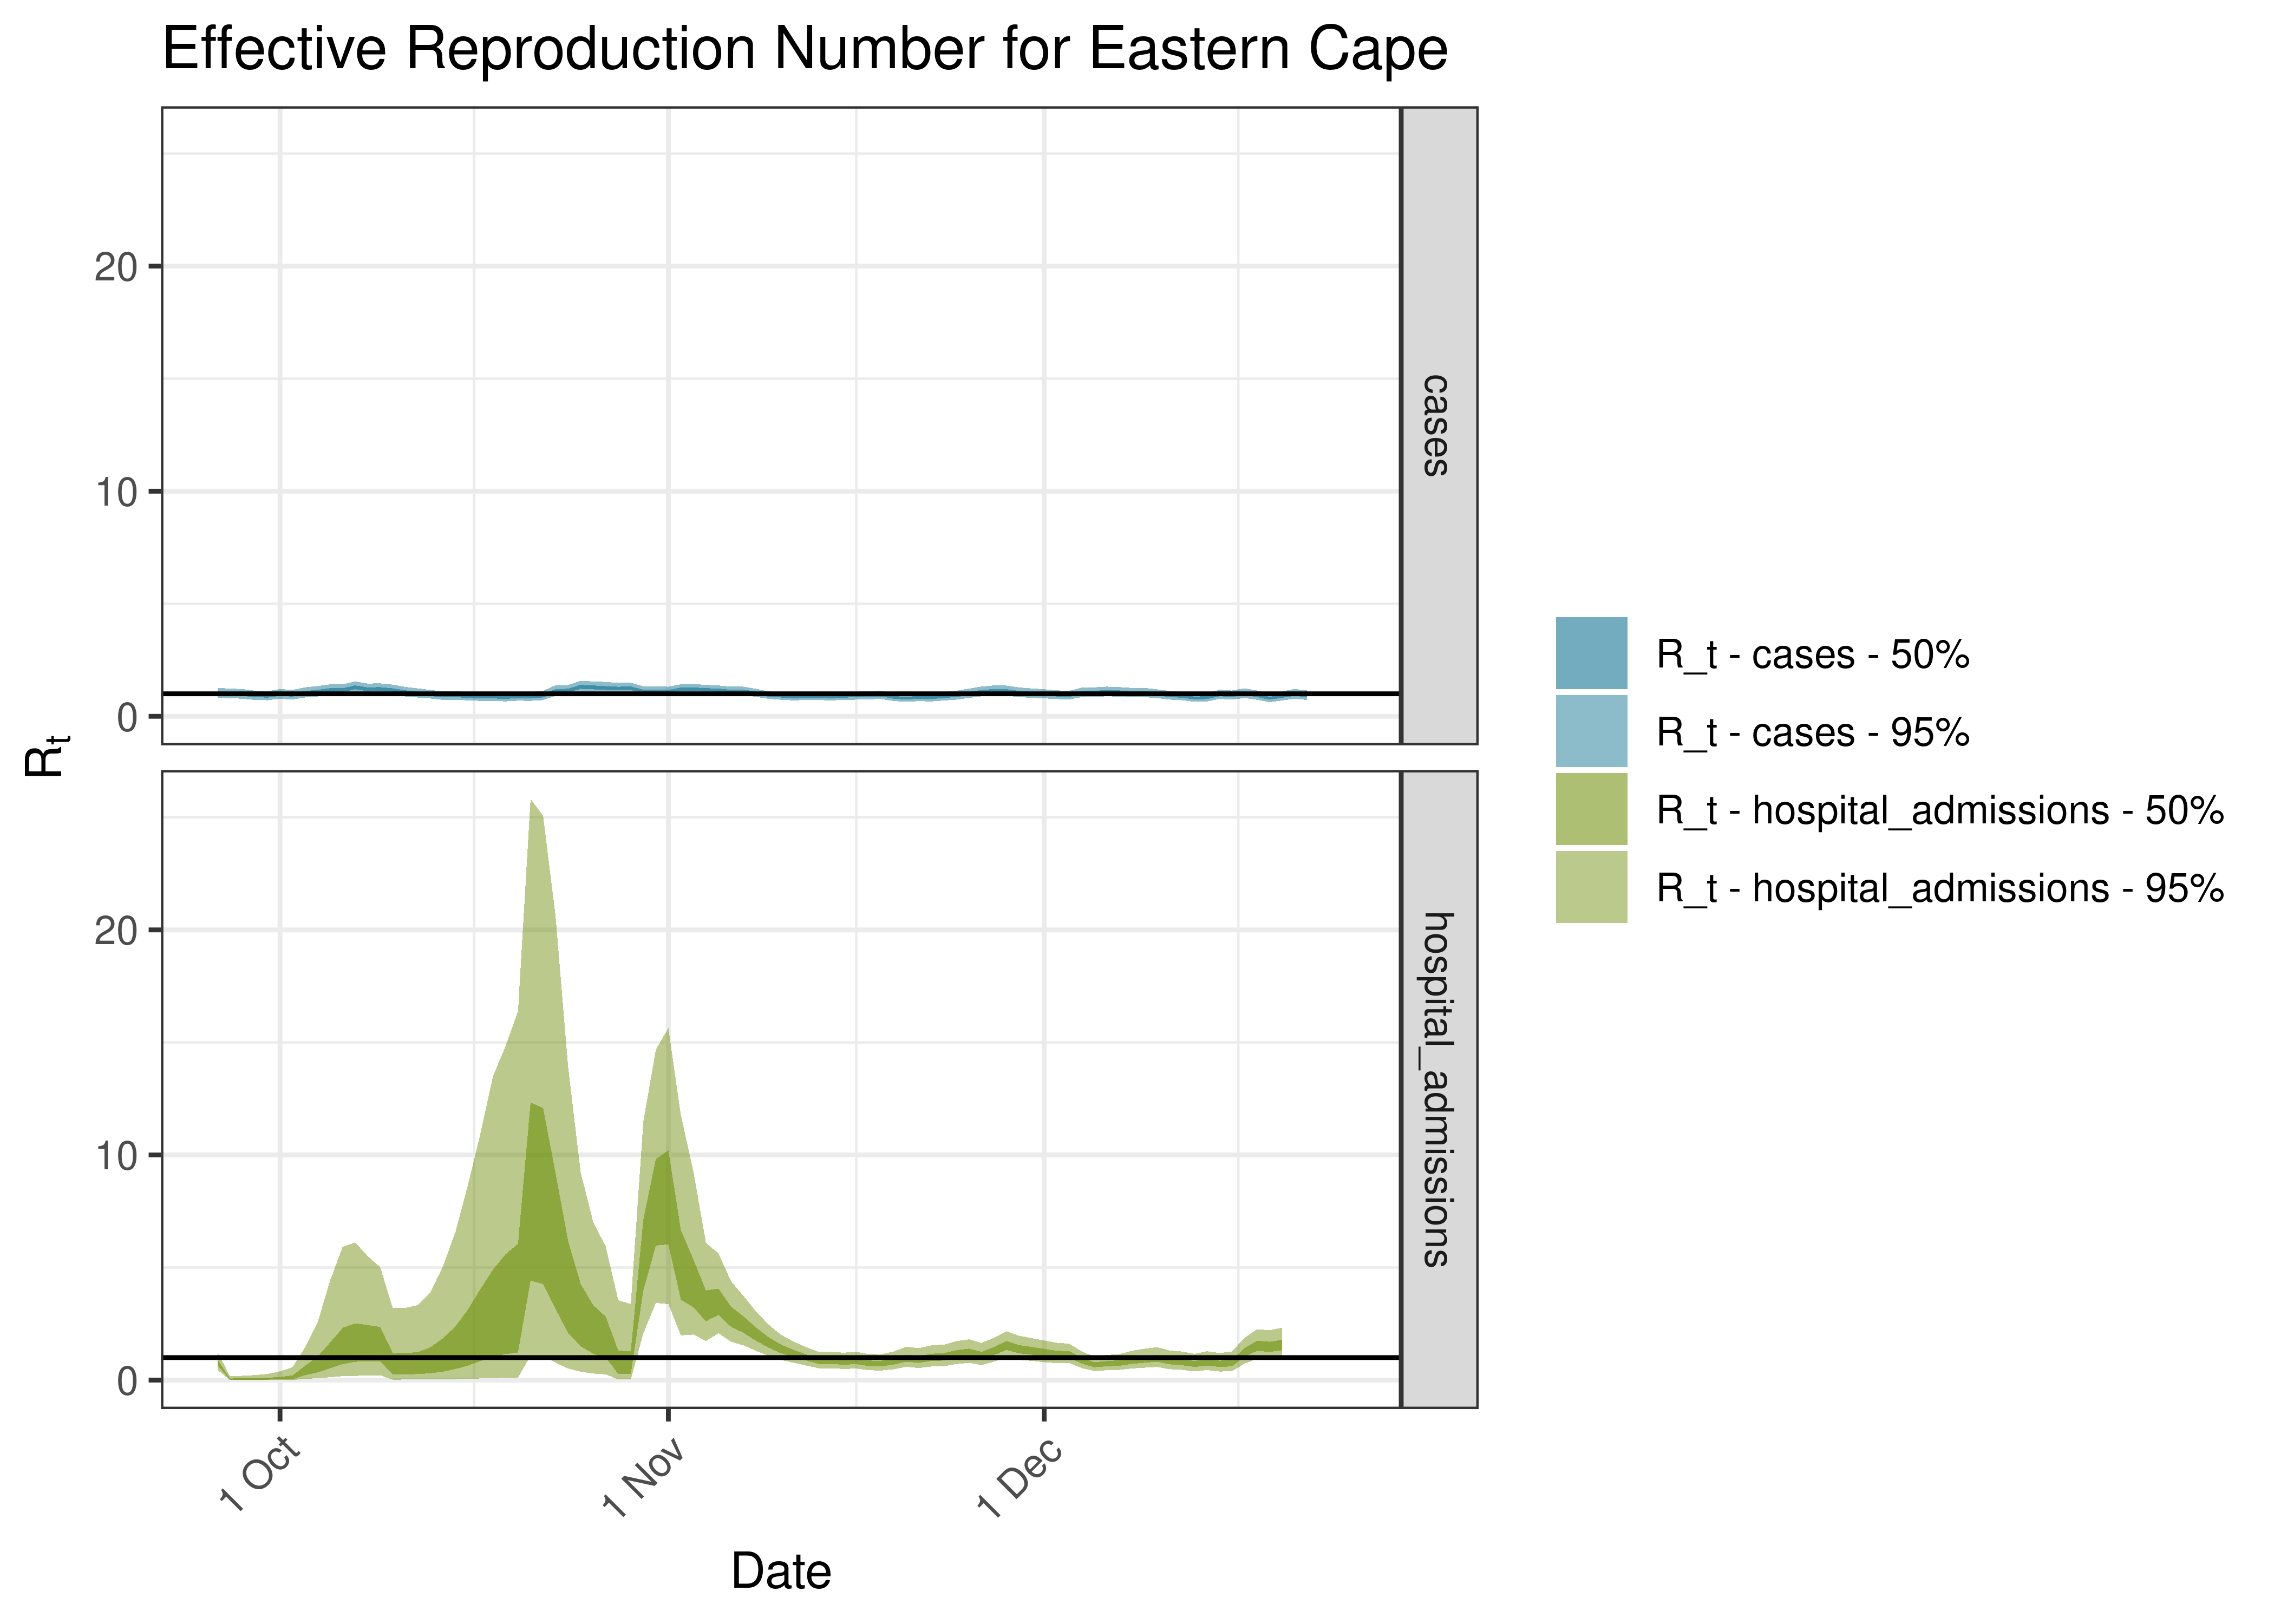 Estimated Effective Reproduction Number for Eastern Cape over last 90 days